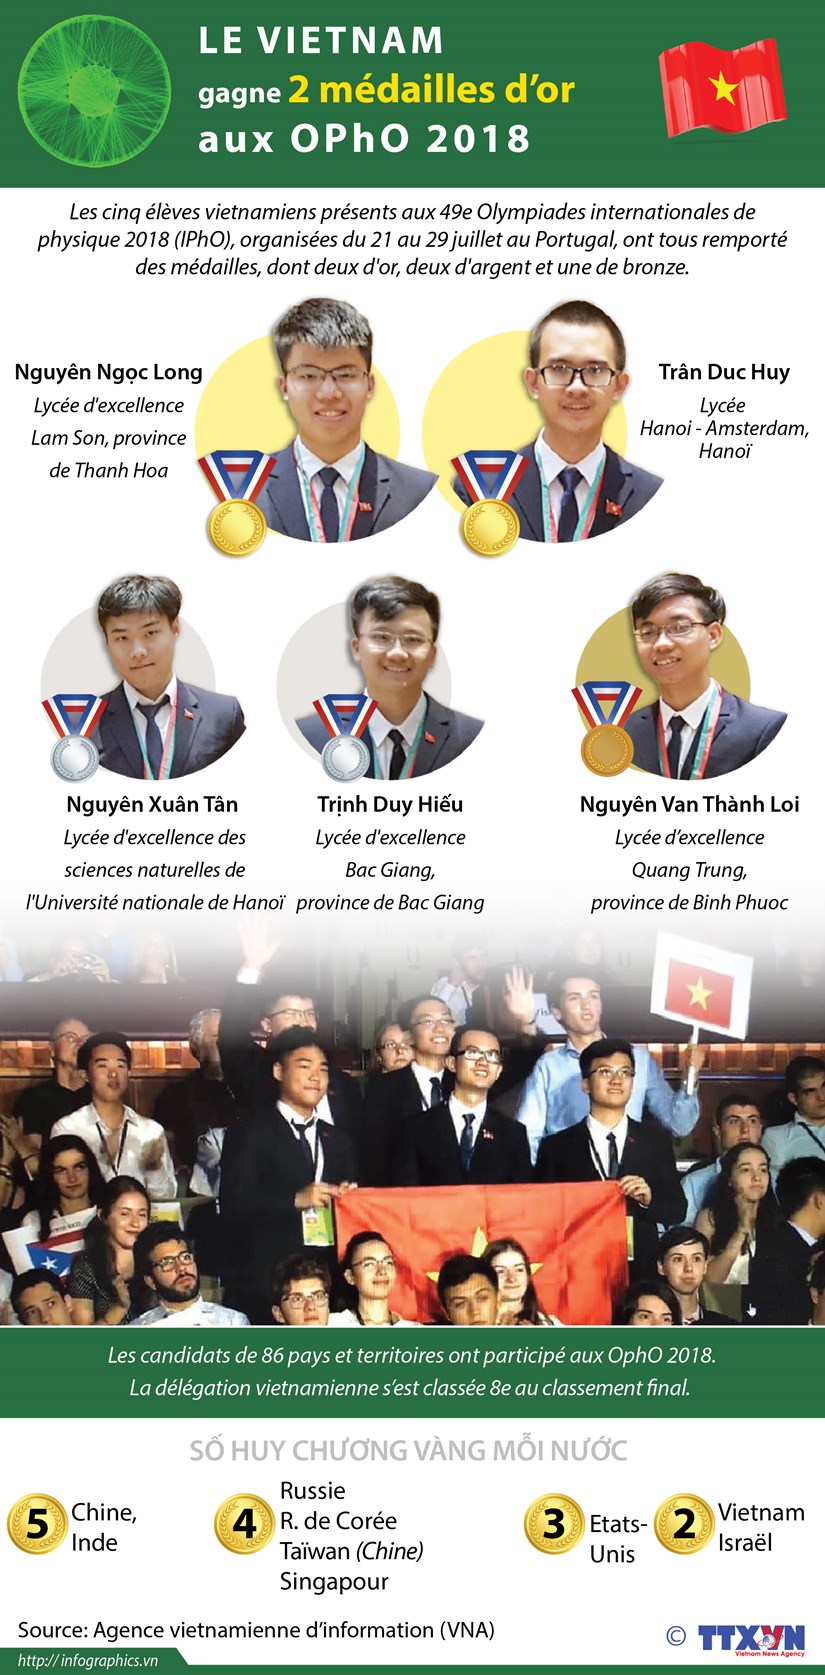 [Infographie] Le VietNam gagne 2 medailles d’or aux OPhO 2018 hinh anh 1